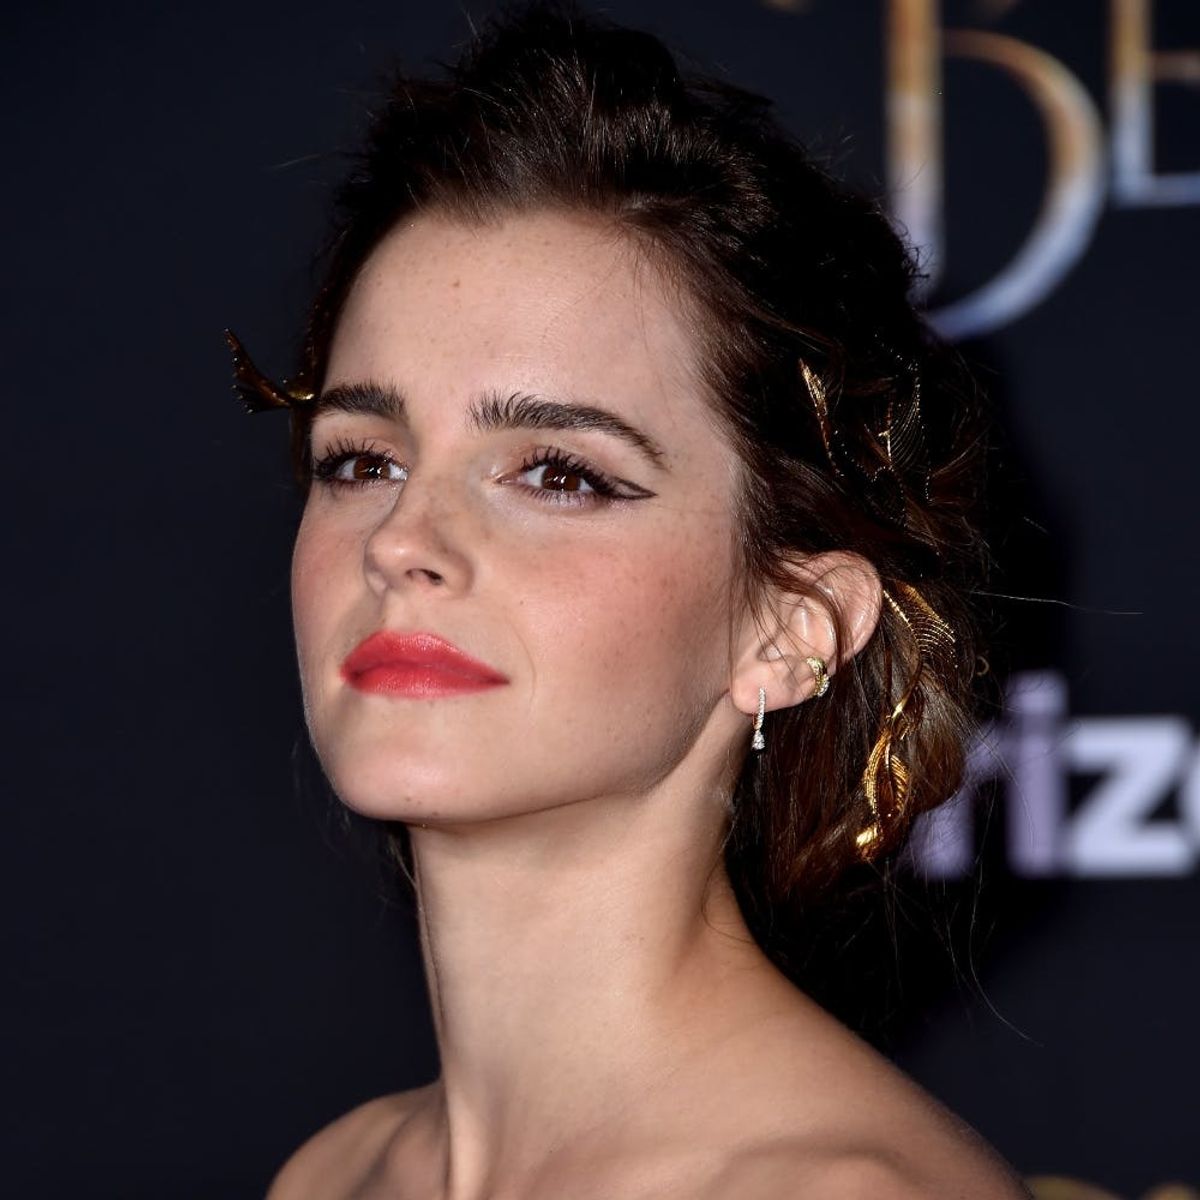 Emma Watson Says *This* Harry Potter Outtake Is Personally “Traumatic”